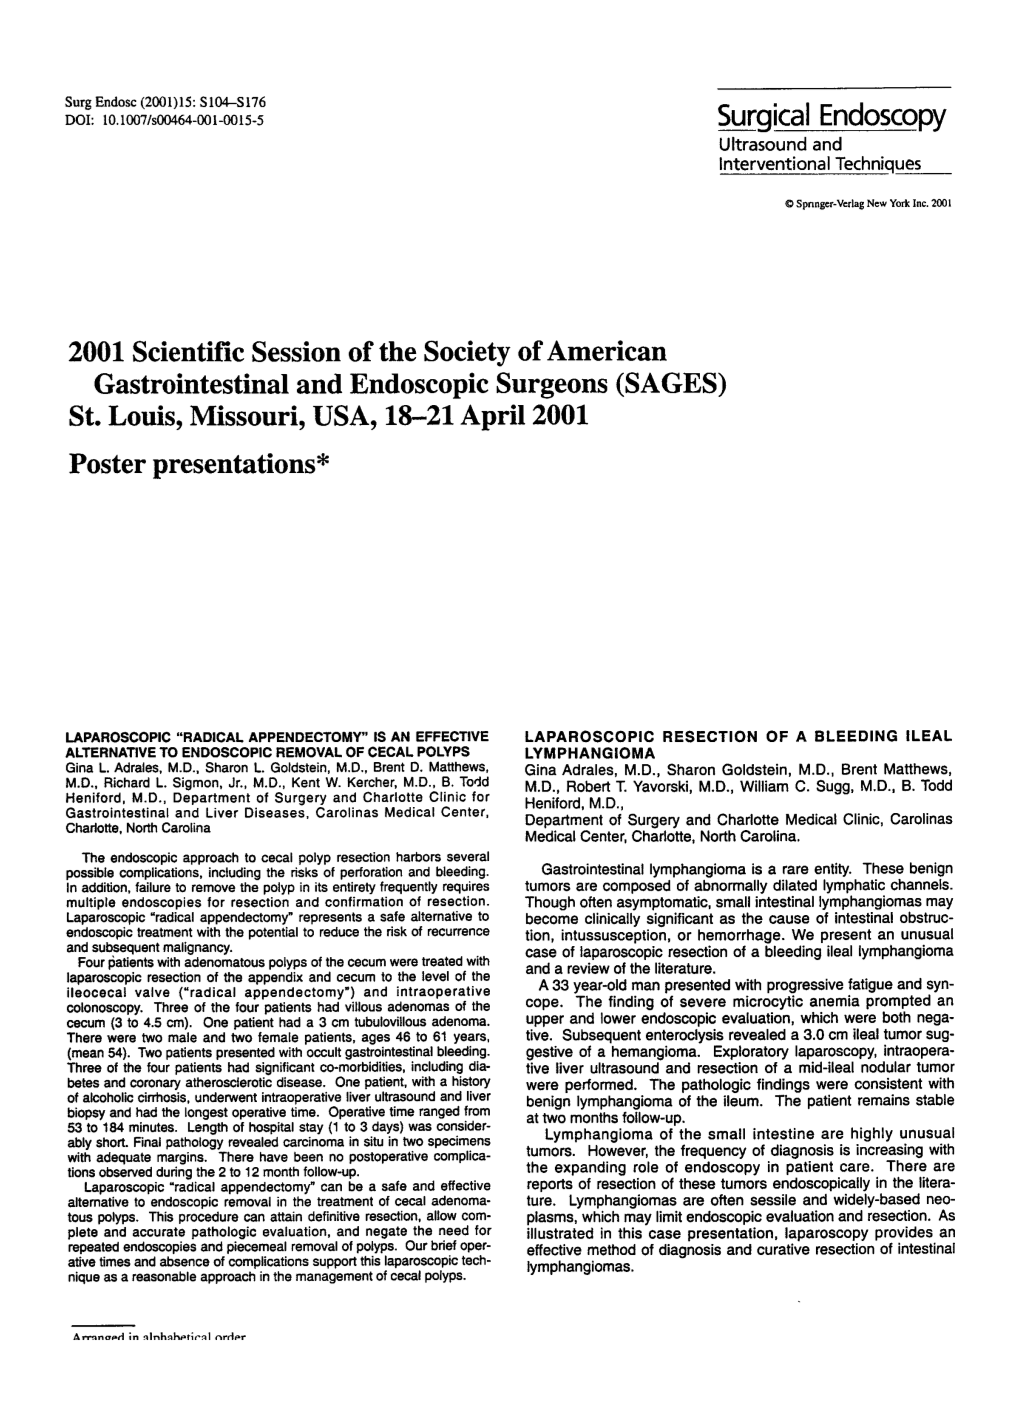 2001 Scientific Session of the Society of American Gastrointestinal and Endoscopic Surgeons (SAGES) St